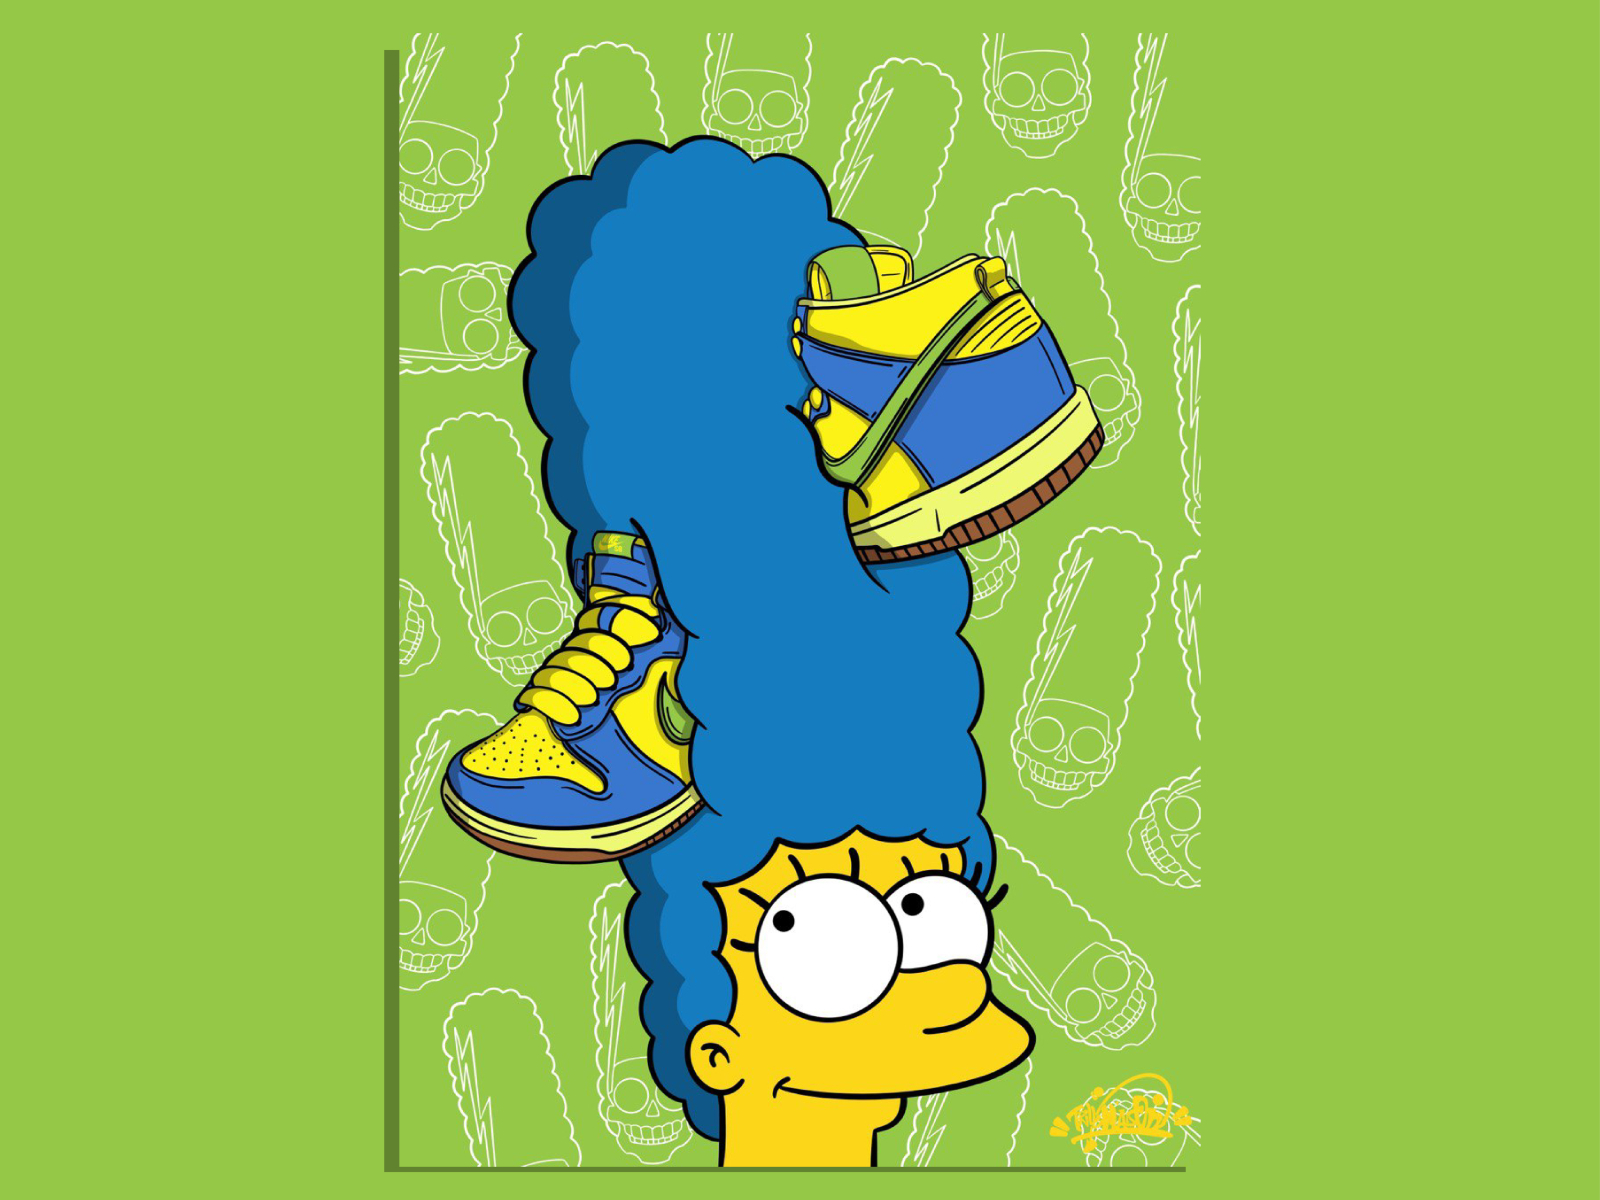 SB Dunk Marge by Maison on Dribbble